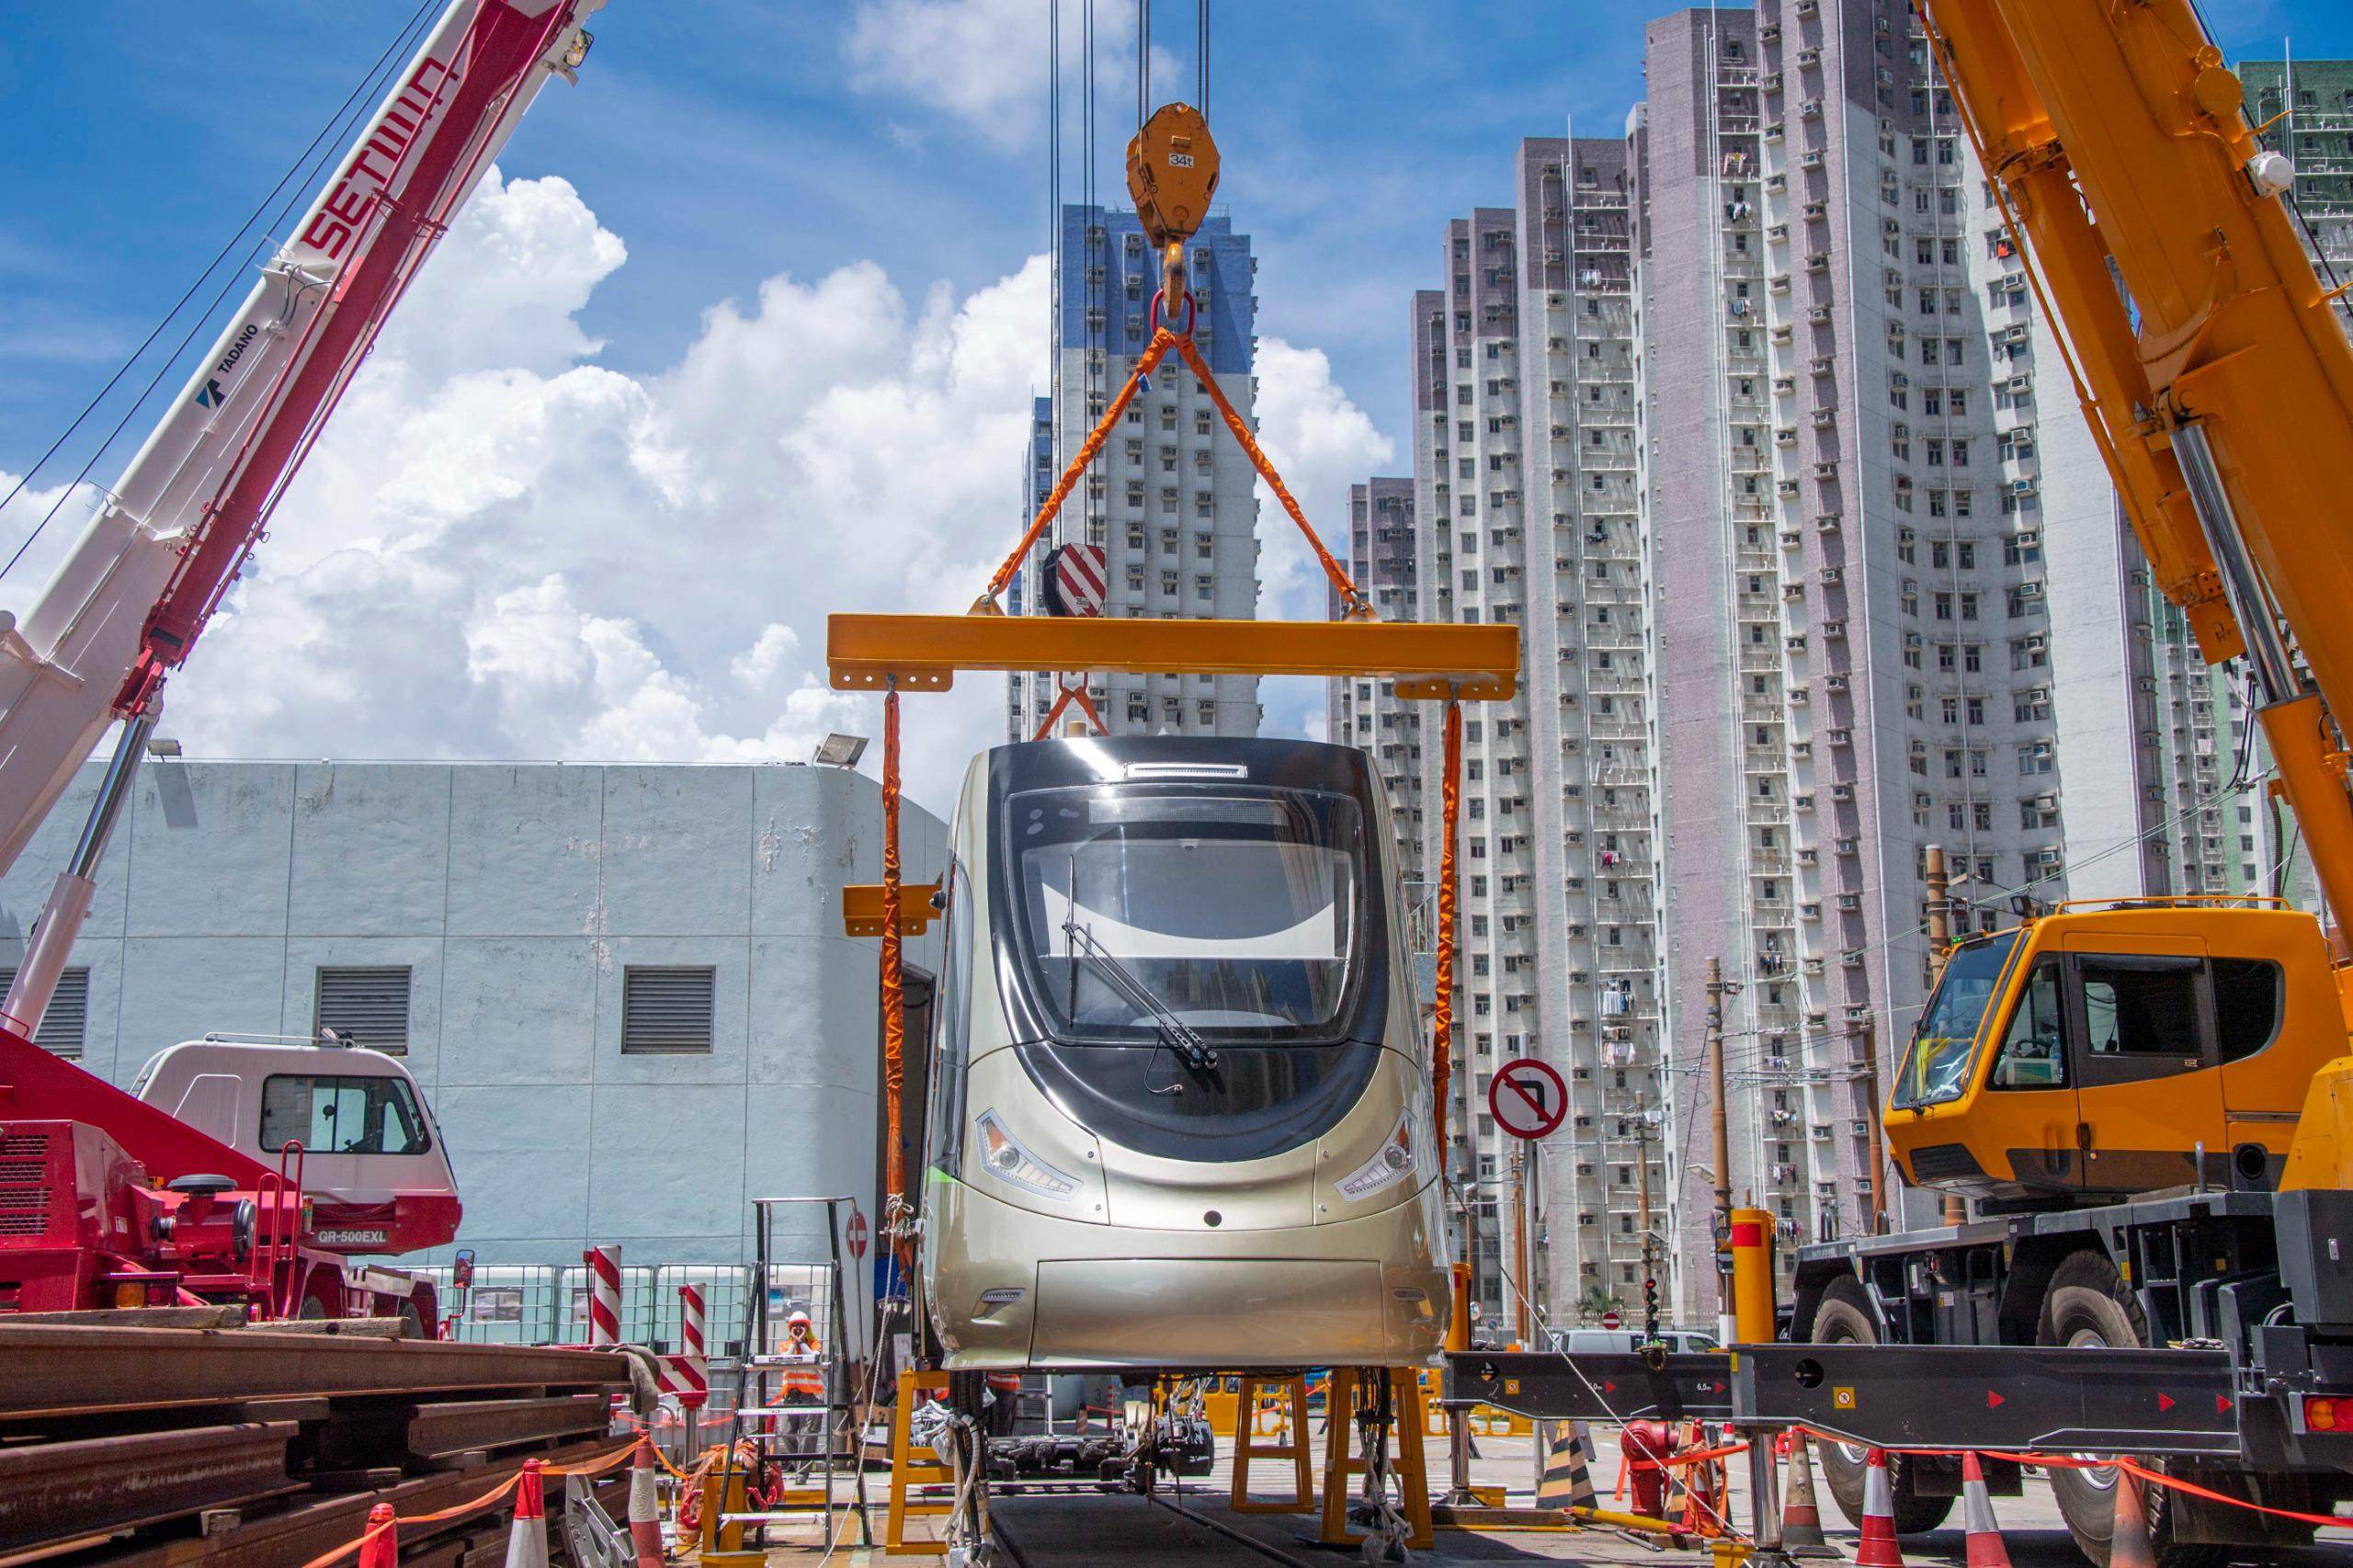 The train arrived on Thursday and is undergoing tests at the MTR Corp’s Tuen Mun depot, the city’s rail operator has said. Photo: Handout